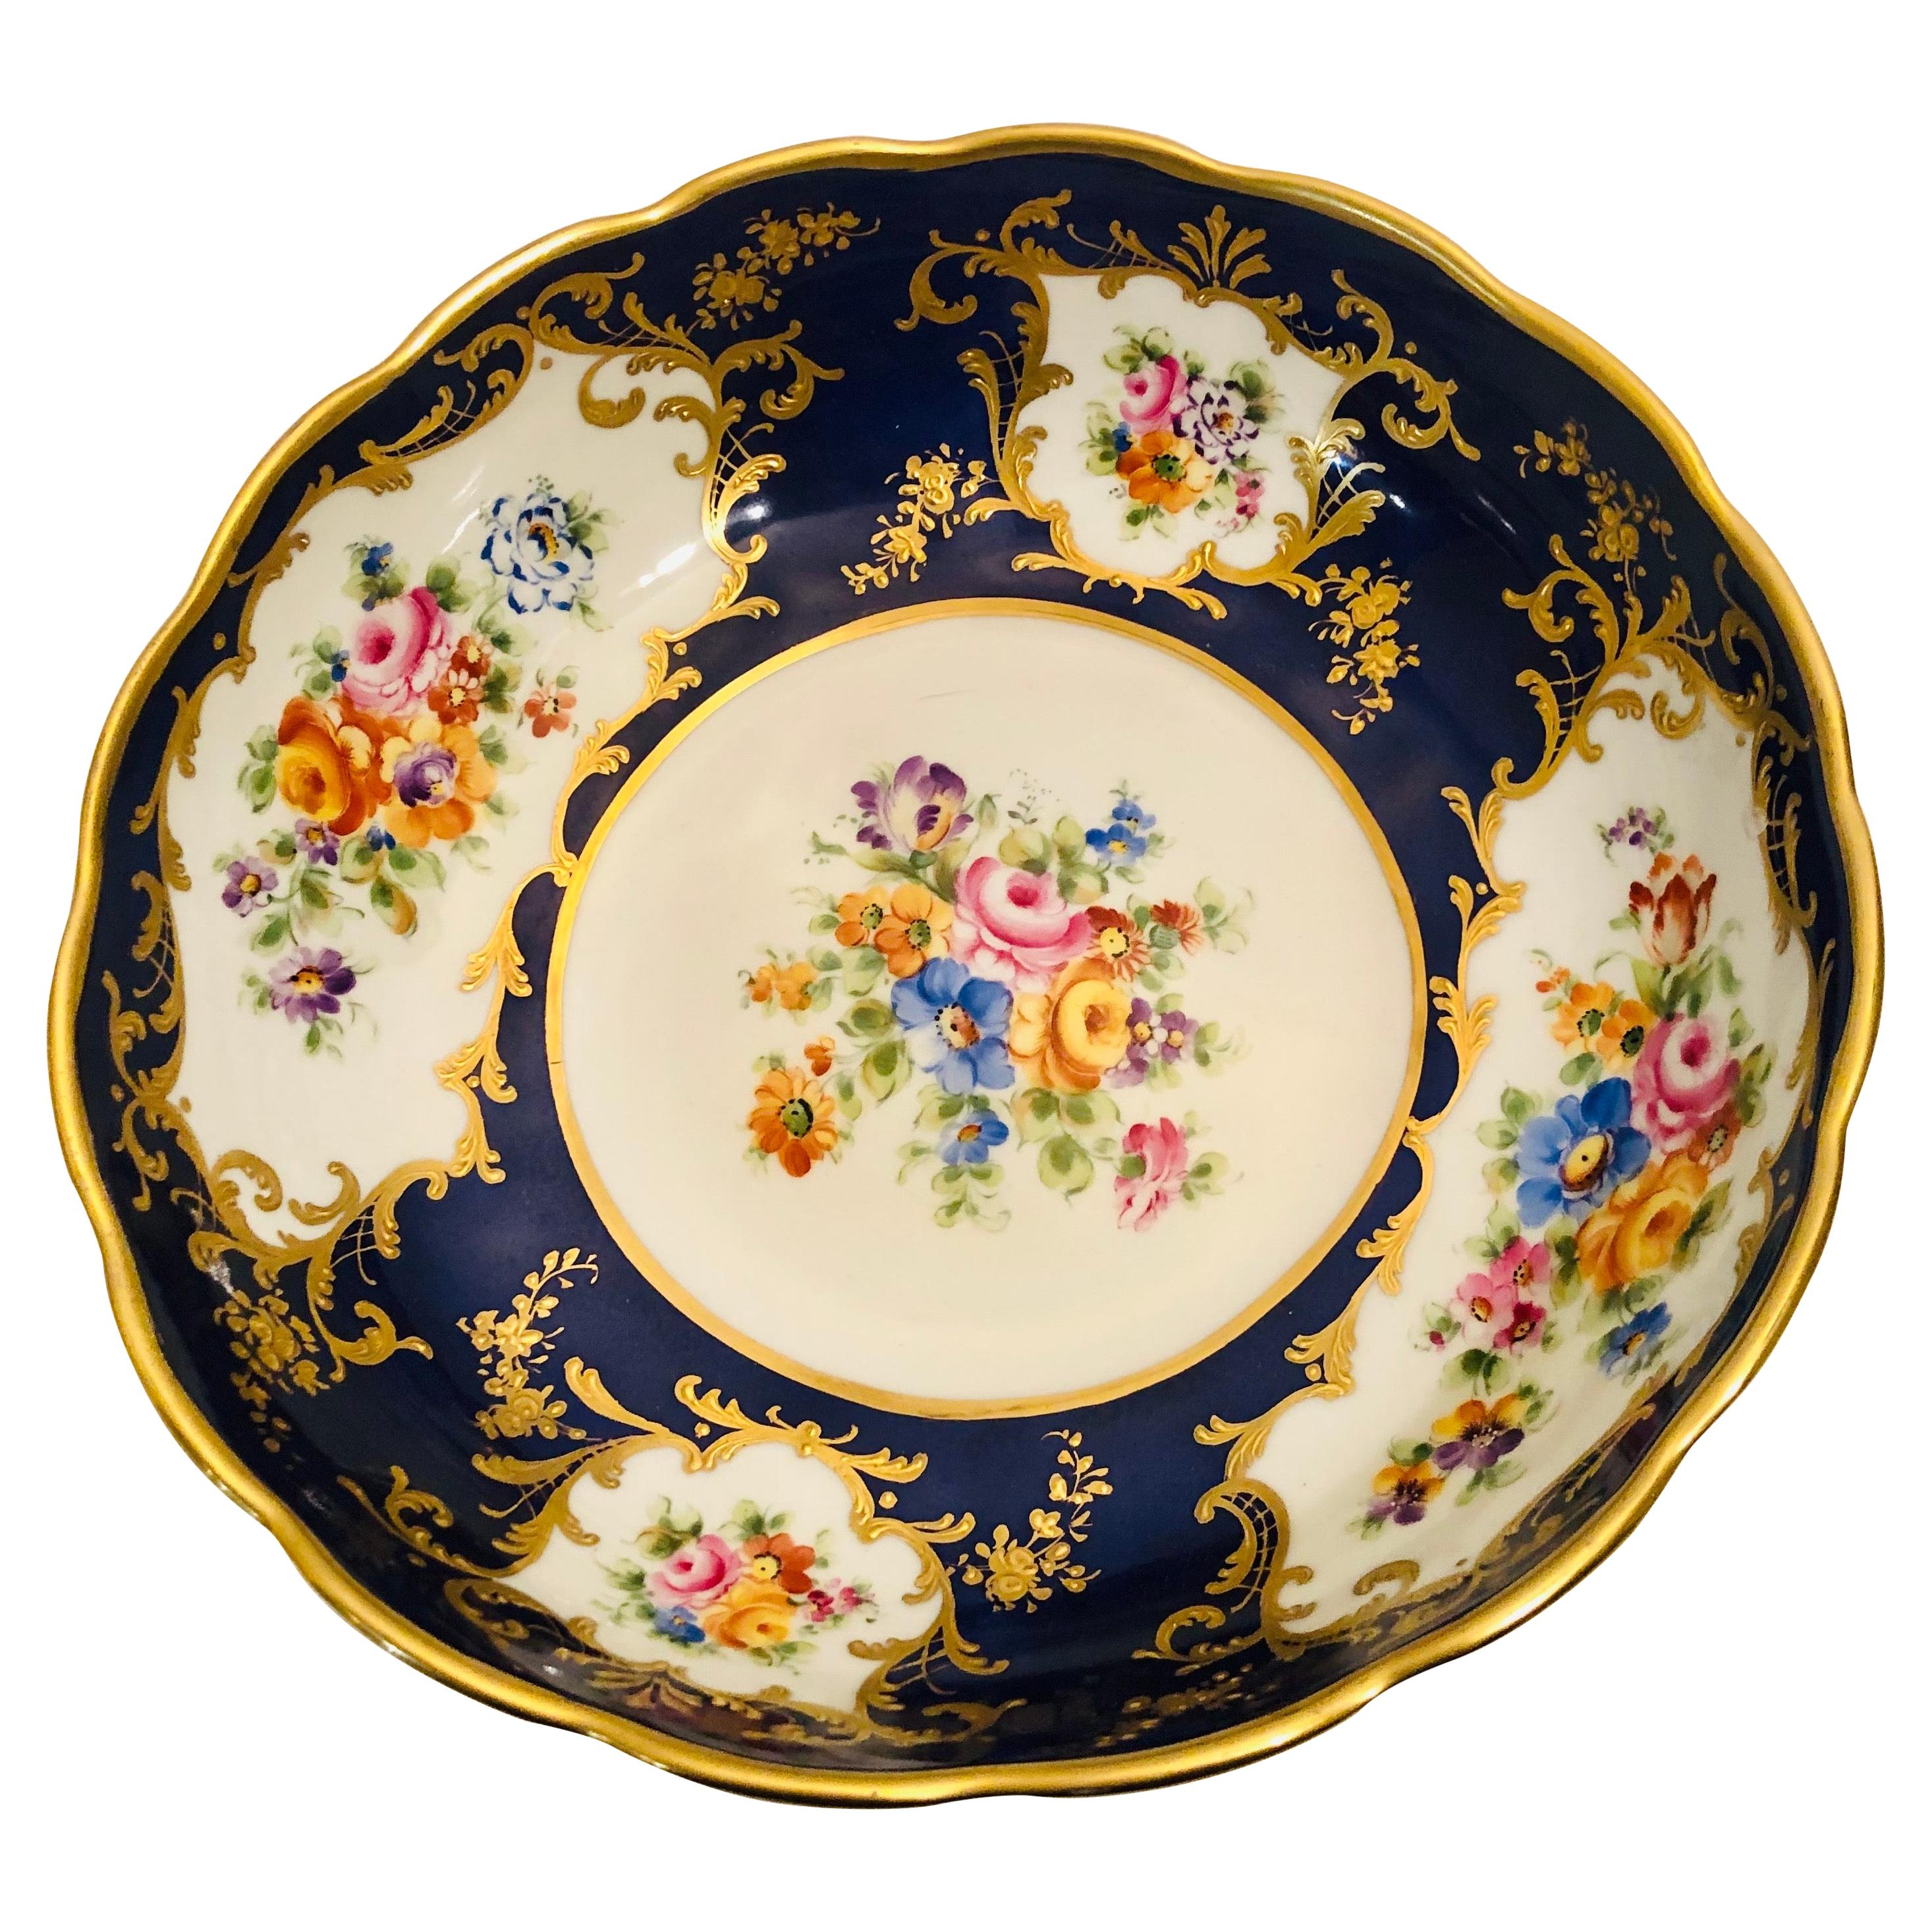 Le Tallec Blue Bowl with Painted Central Flower Bouquet and 4 Flower Medallions